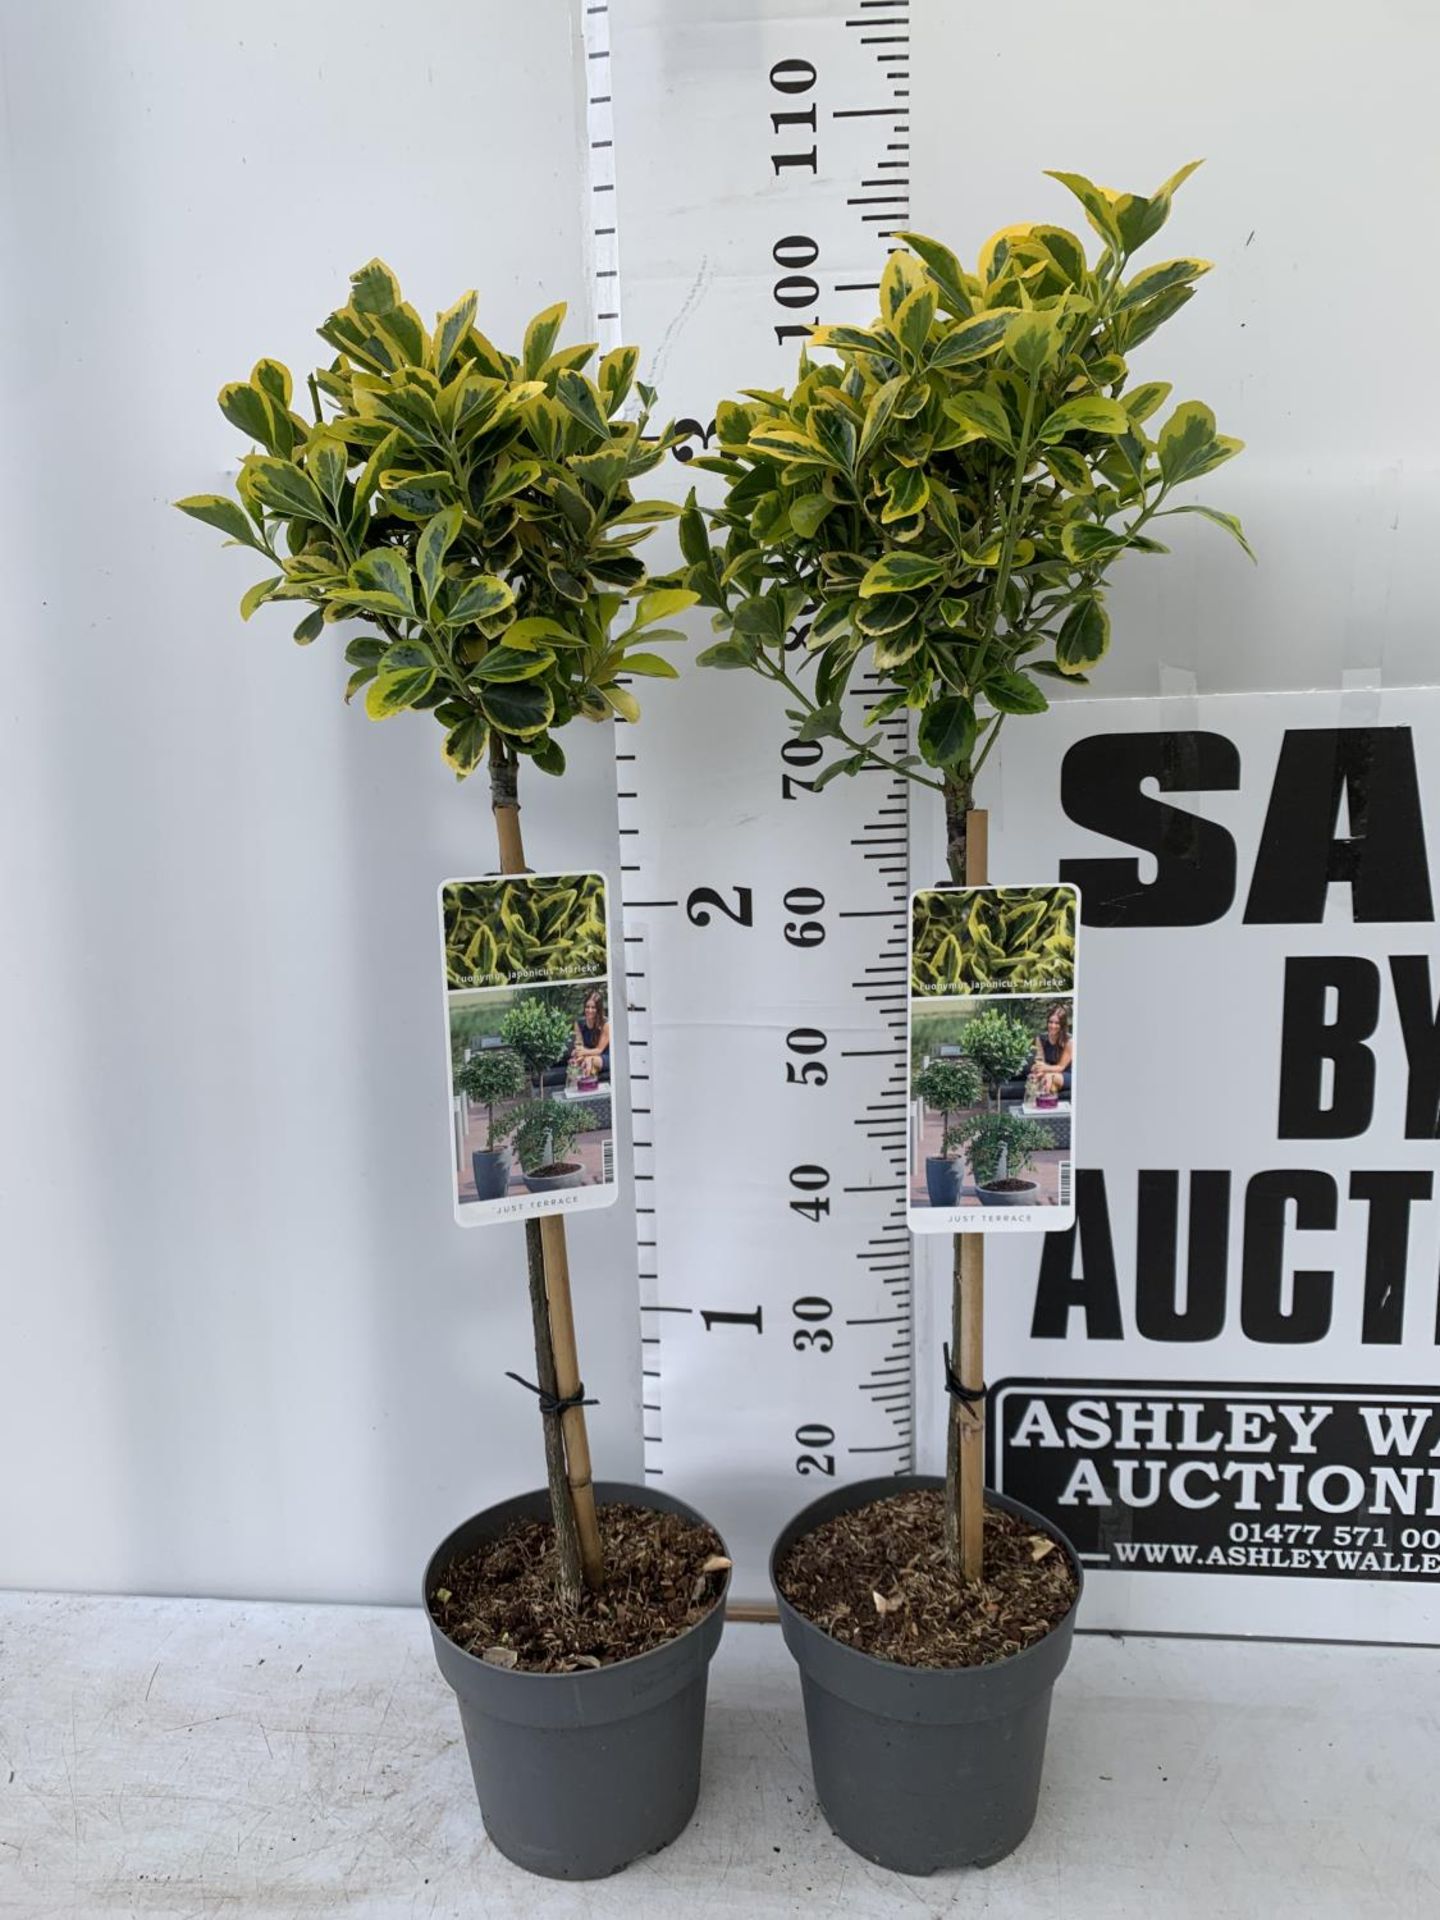 TWO EUONYMUS JAPONICUS 'MARIEKE' STANDARD TREES APPROX 100CM IN HEIGHT IN 3LTR POTS PLUS VAT TO BE